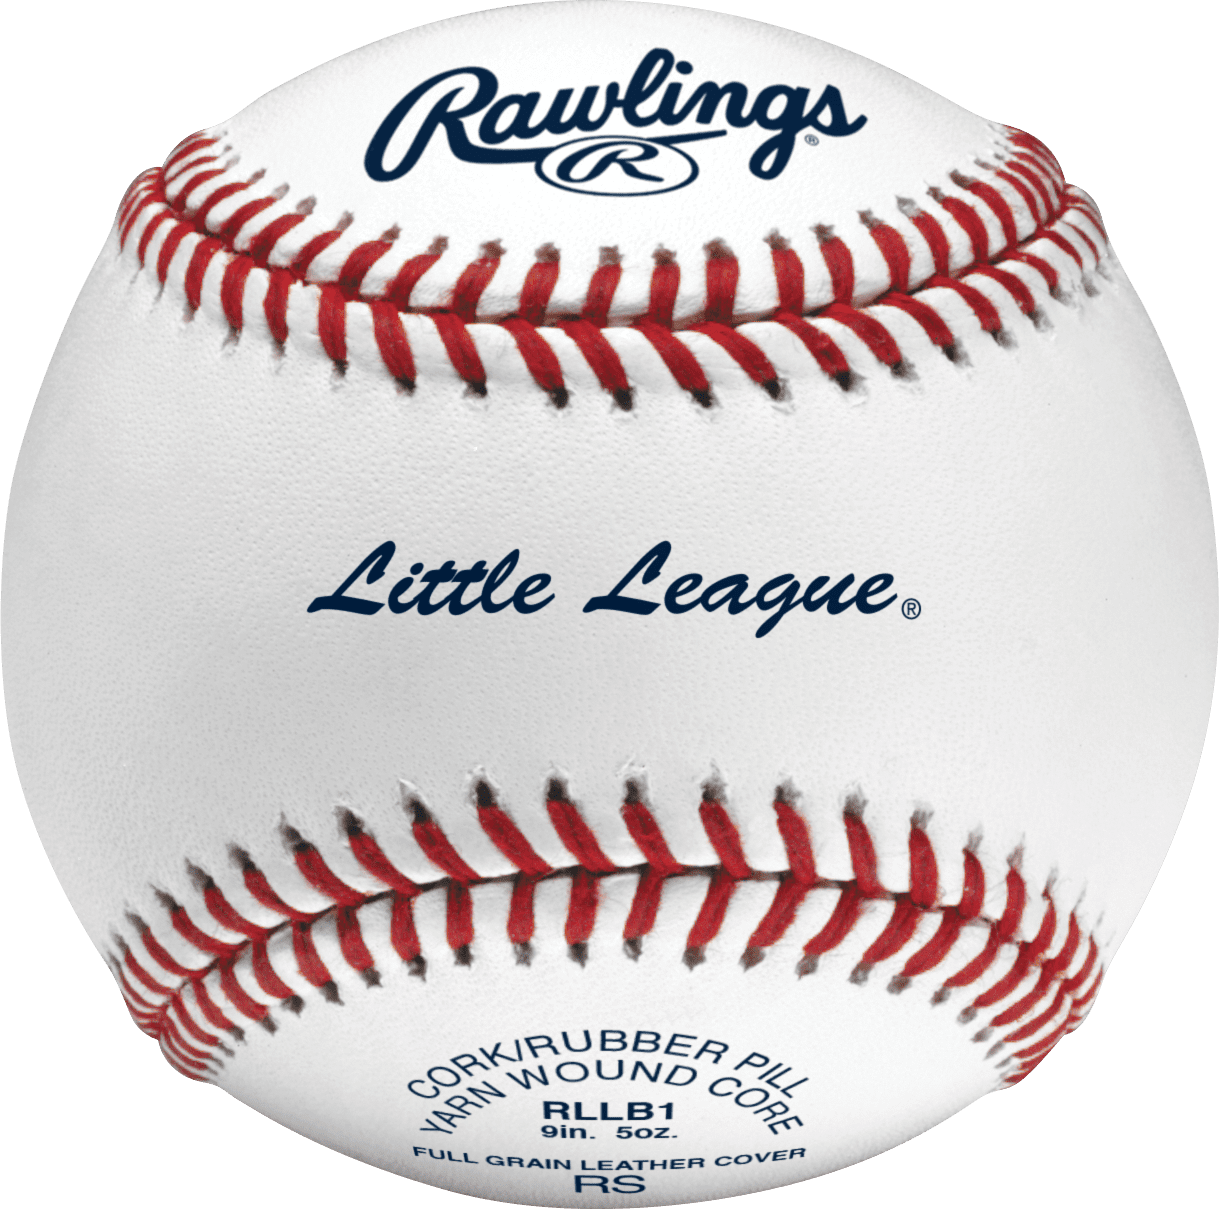 Rawlings Official League Leather Cover Baseball Youth Ages 10 & Under Sealed 